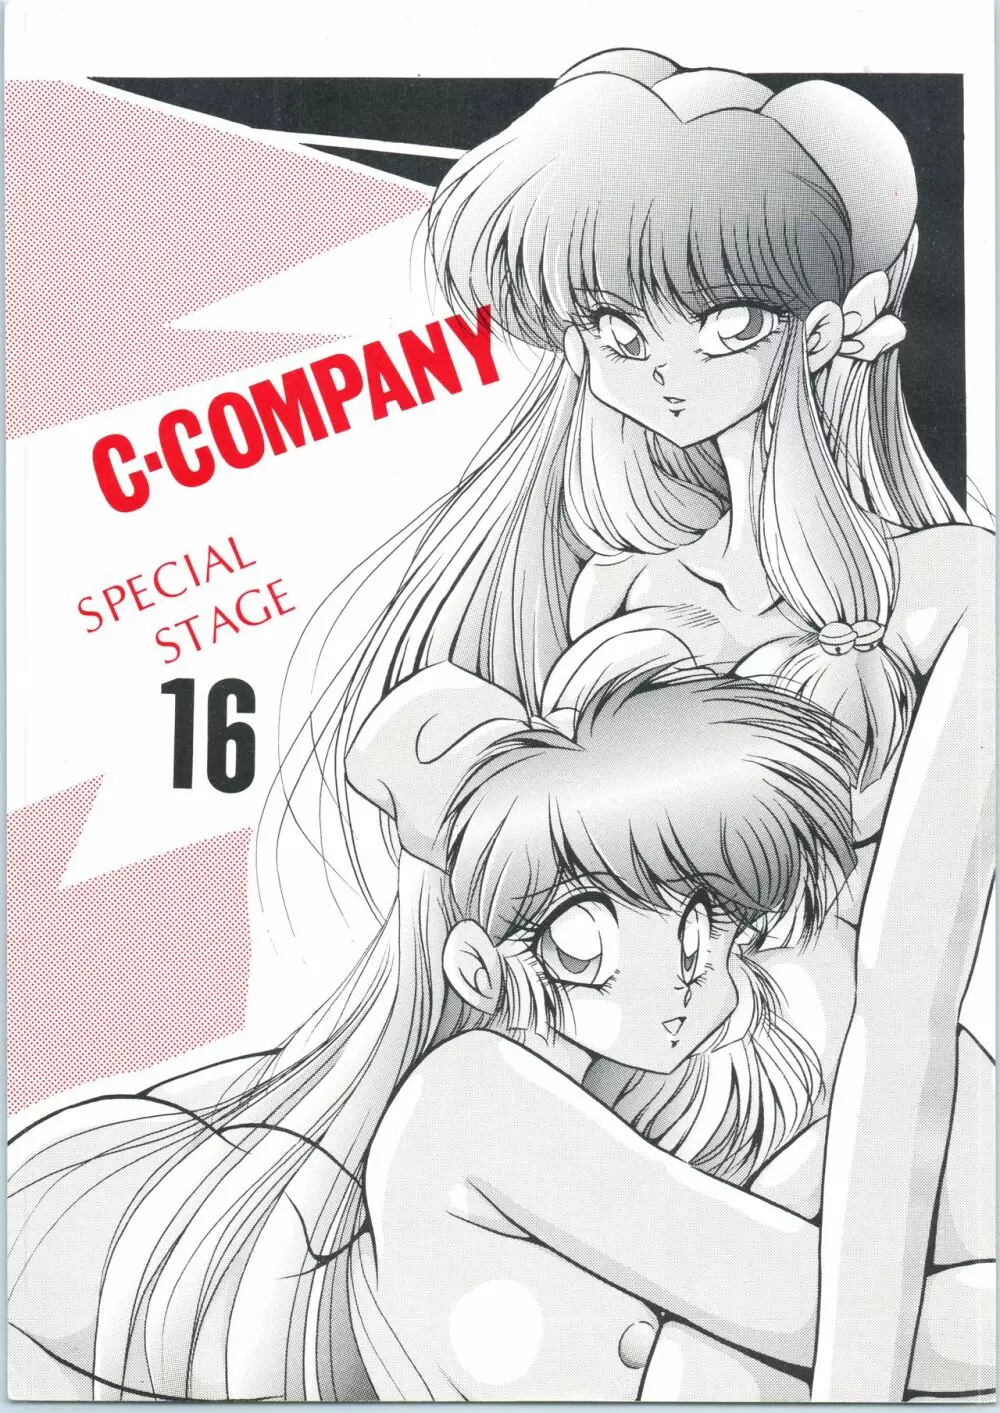 C-COMPANY SPECIAL STAGE 16 Page.1